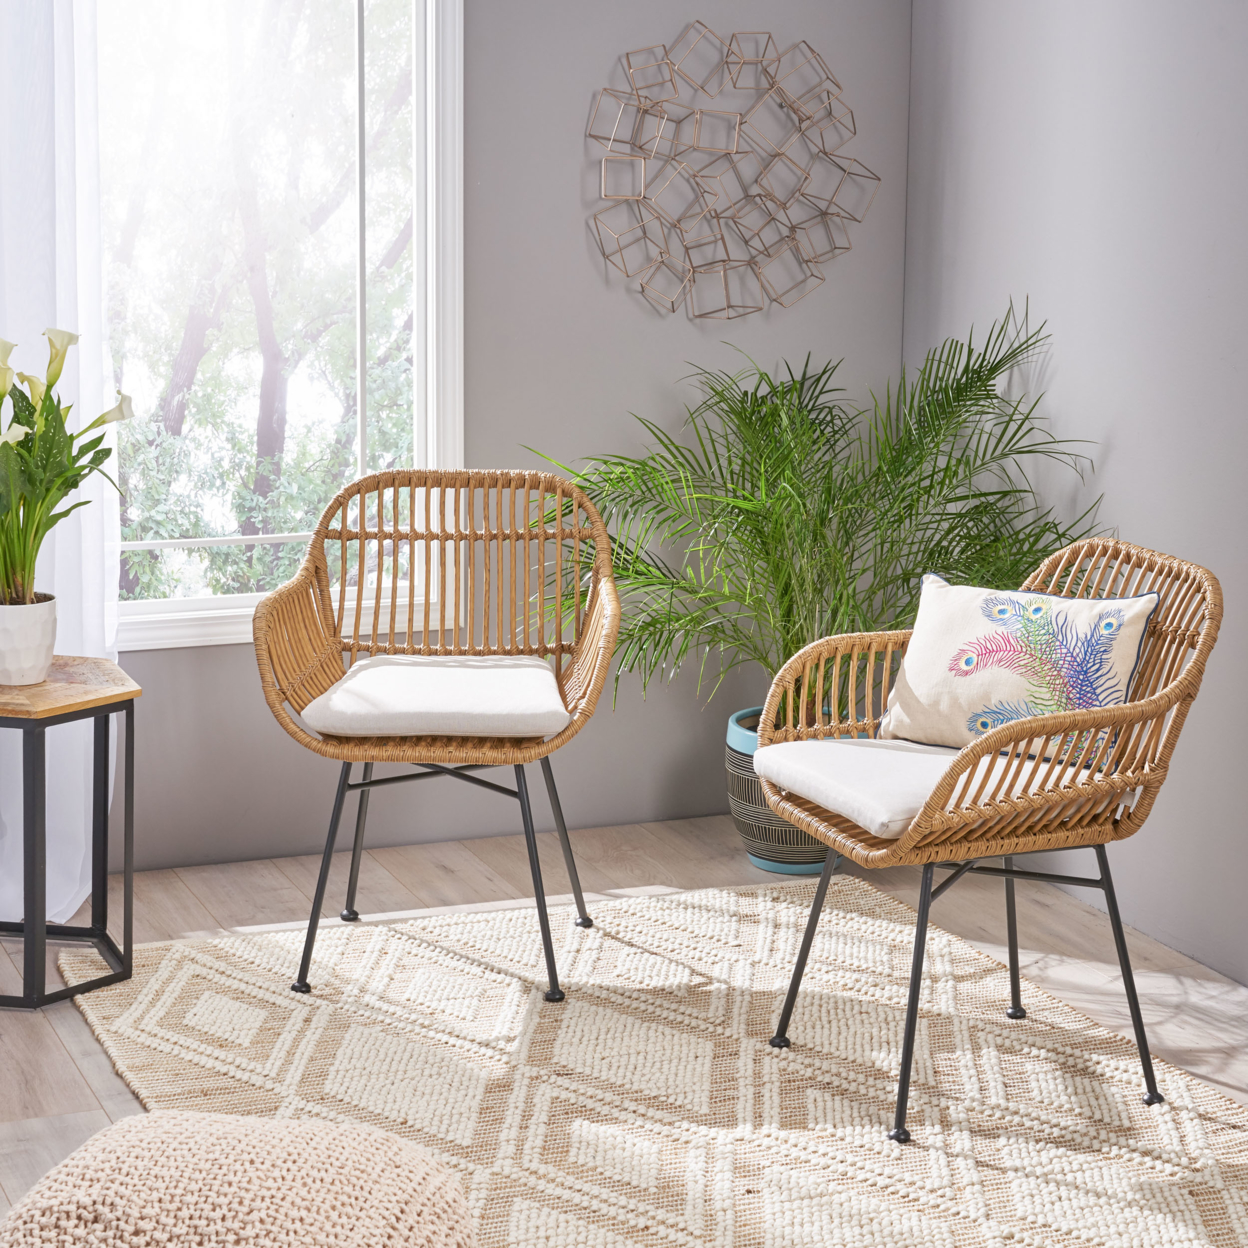 Rodney Indoor Woven Faux Rattan Chairs With Cushions (Set Of 2) - Light Brown + Beige